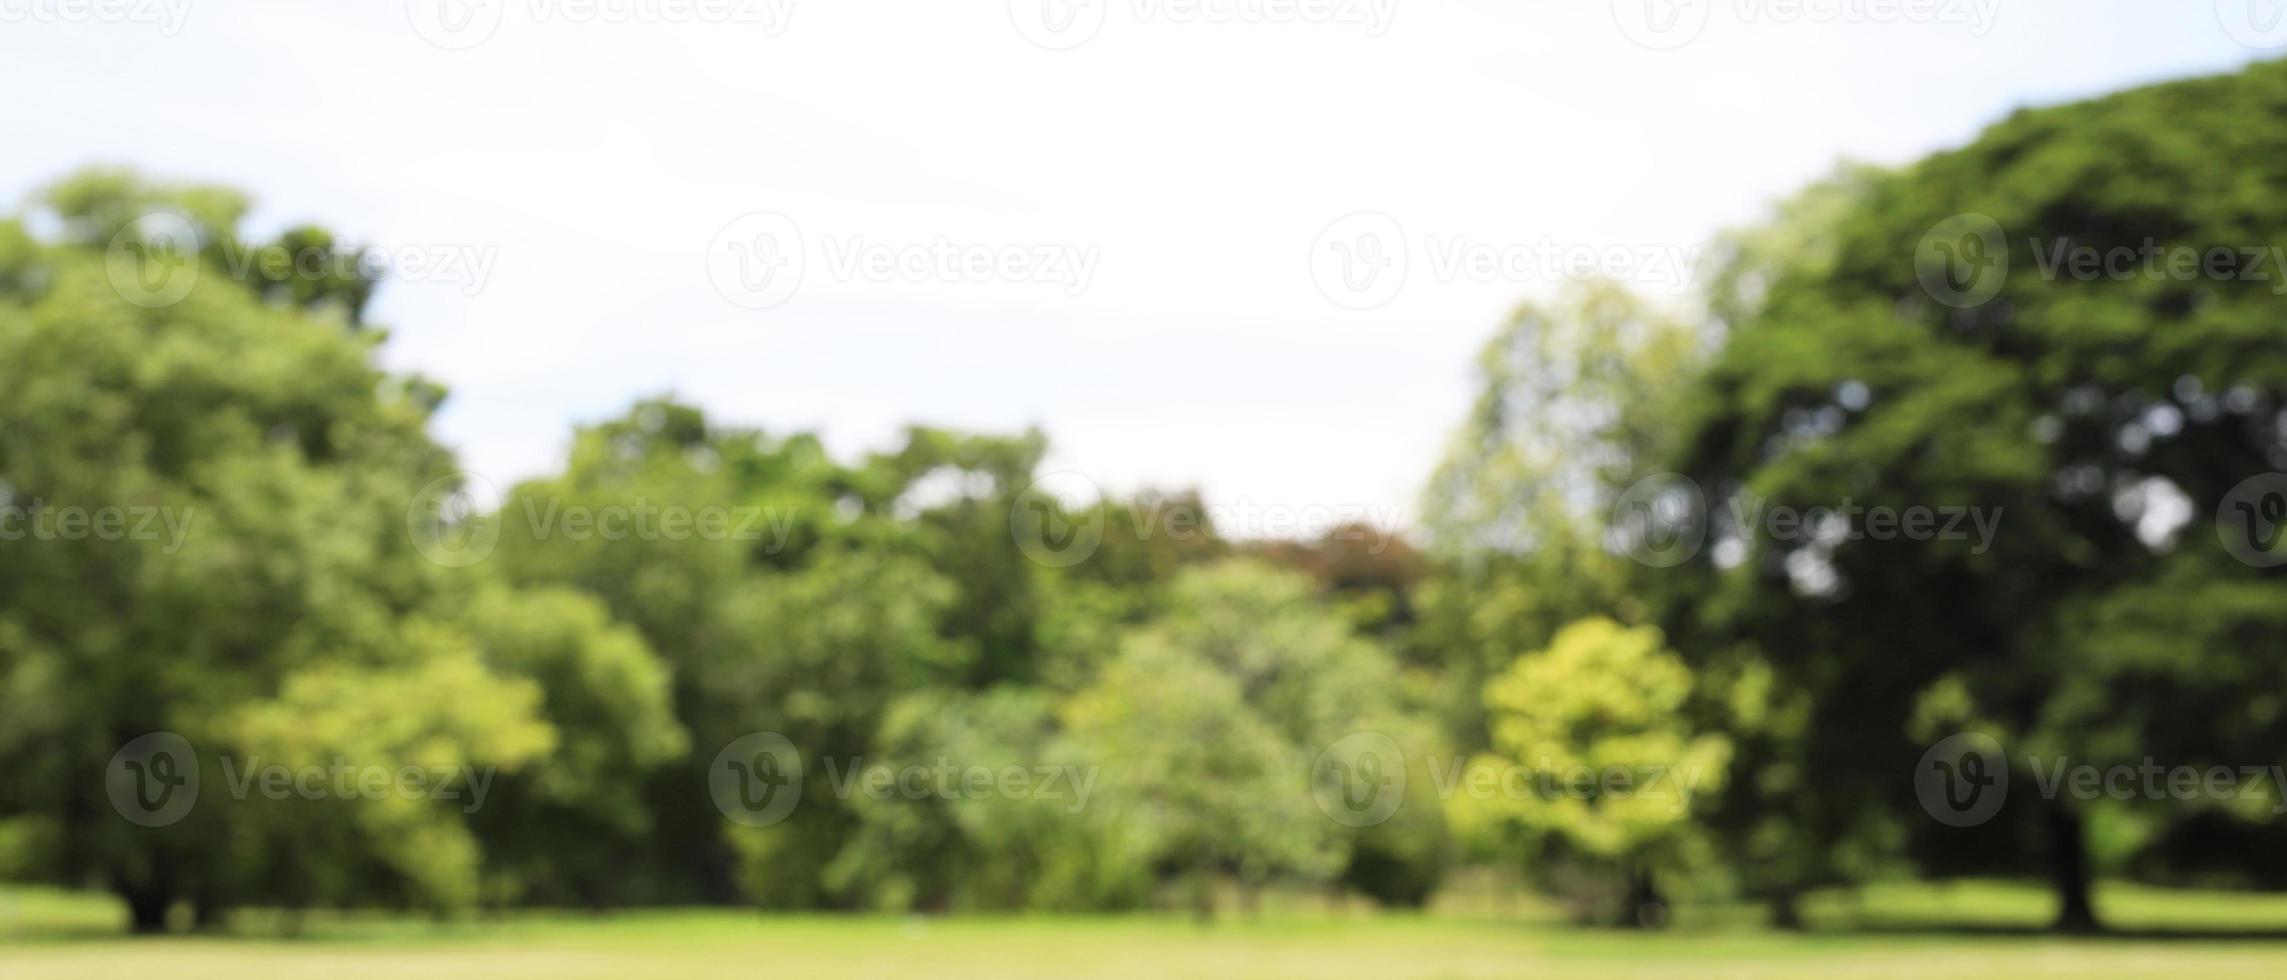 park tree in nature green and Lawn background, in garden summer outdoor.  11027238 Stock Photo at Vecteezy